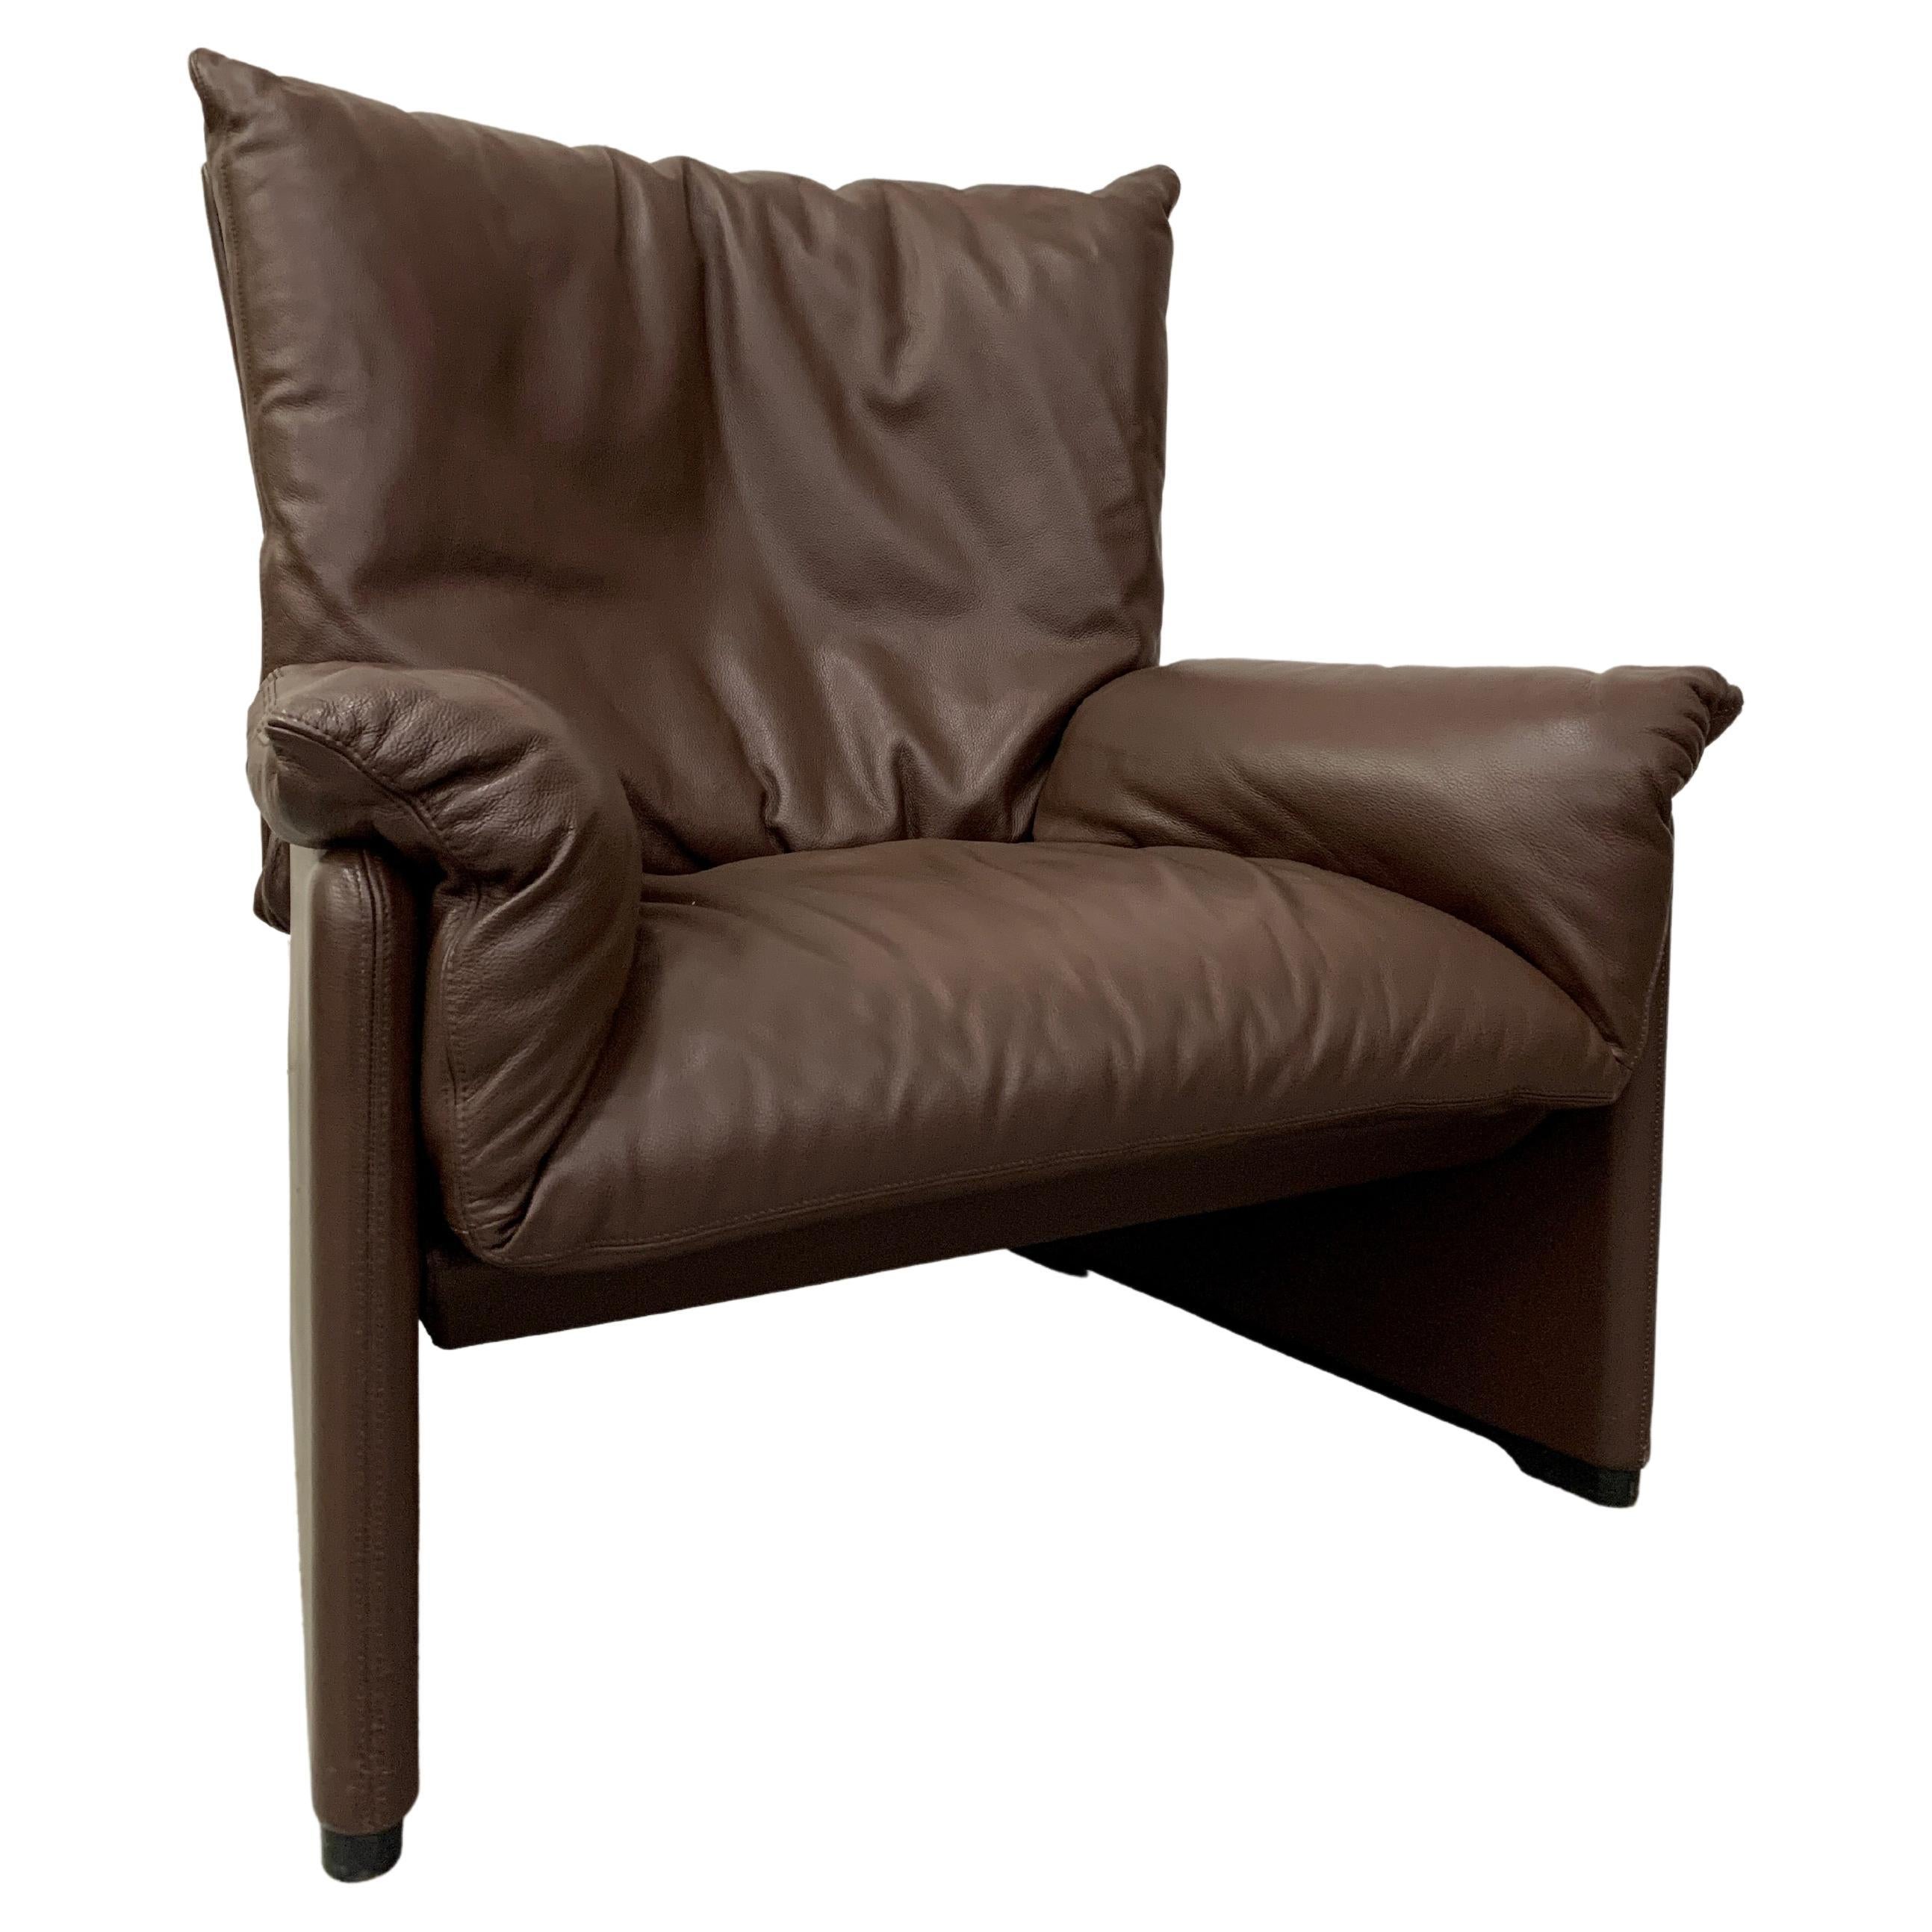 Cassina "Palmaria" Leather Lounge Chair  For Sale